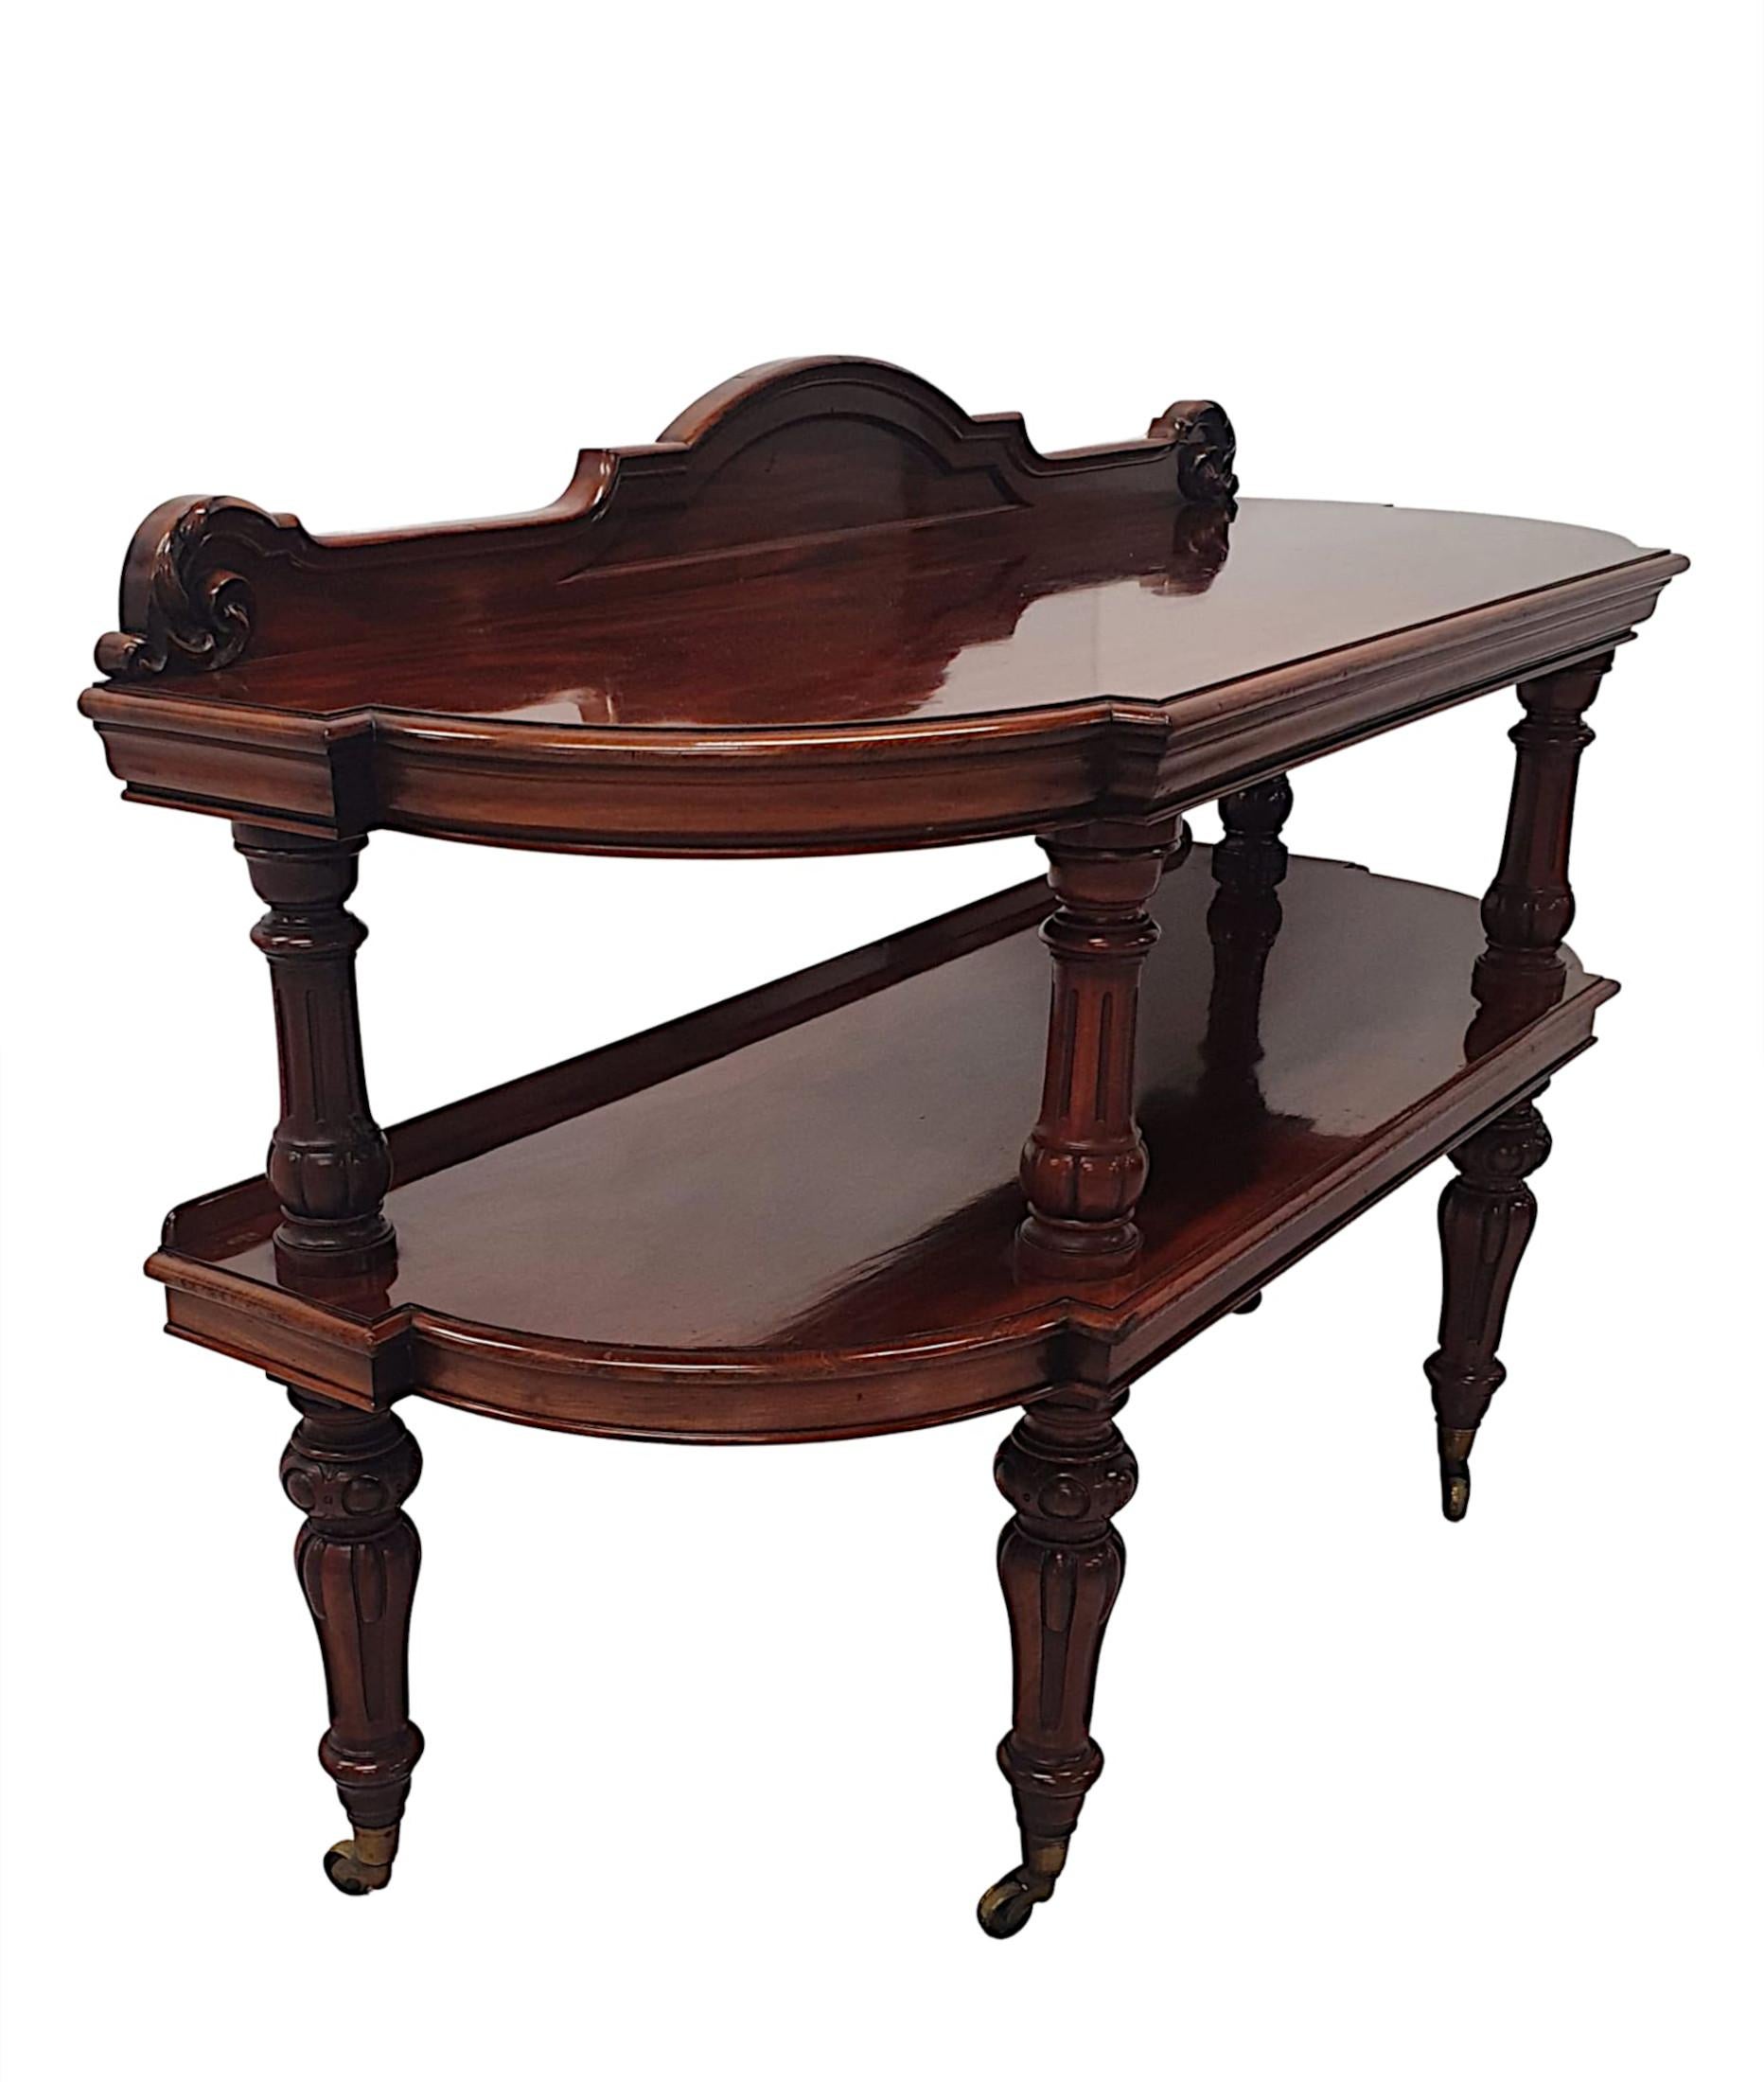 A very fine 19th Century mahogany side or serving table in the manner of Gillows of Lancaster and London. Stunningly hand carved with rich patination, the shaped and moulded top with curved gallery back rail with foliate motif detail, raised above